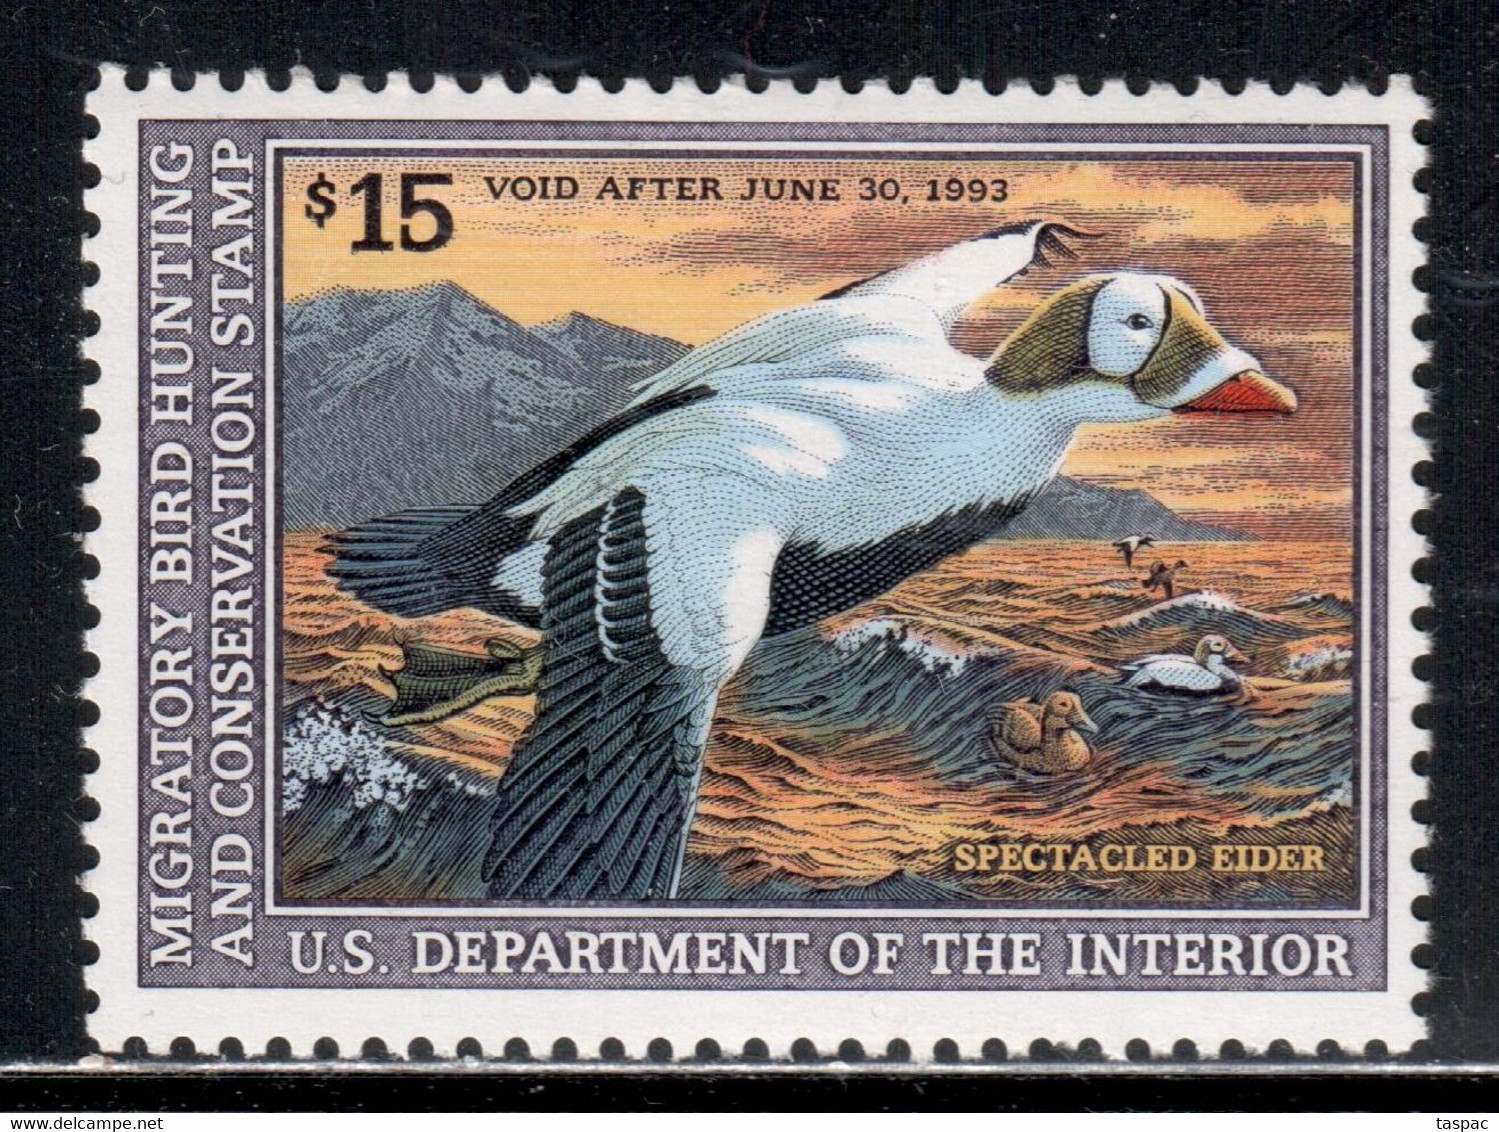 United States 1993 Duck Stamp ** MNH - Spectacled Eider - Duck Stamps